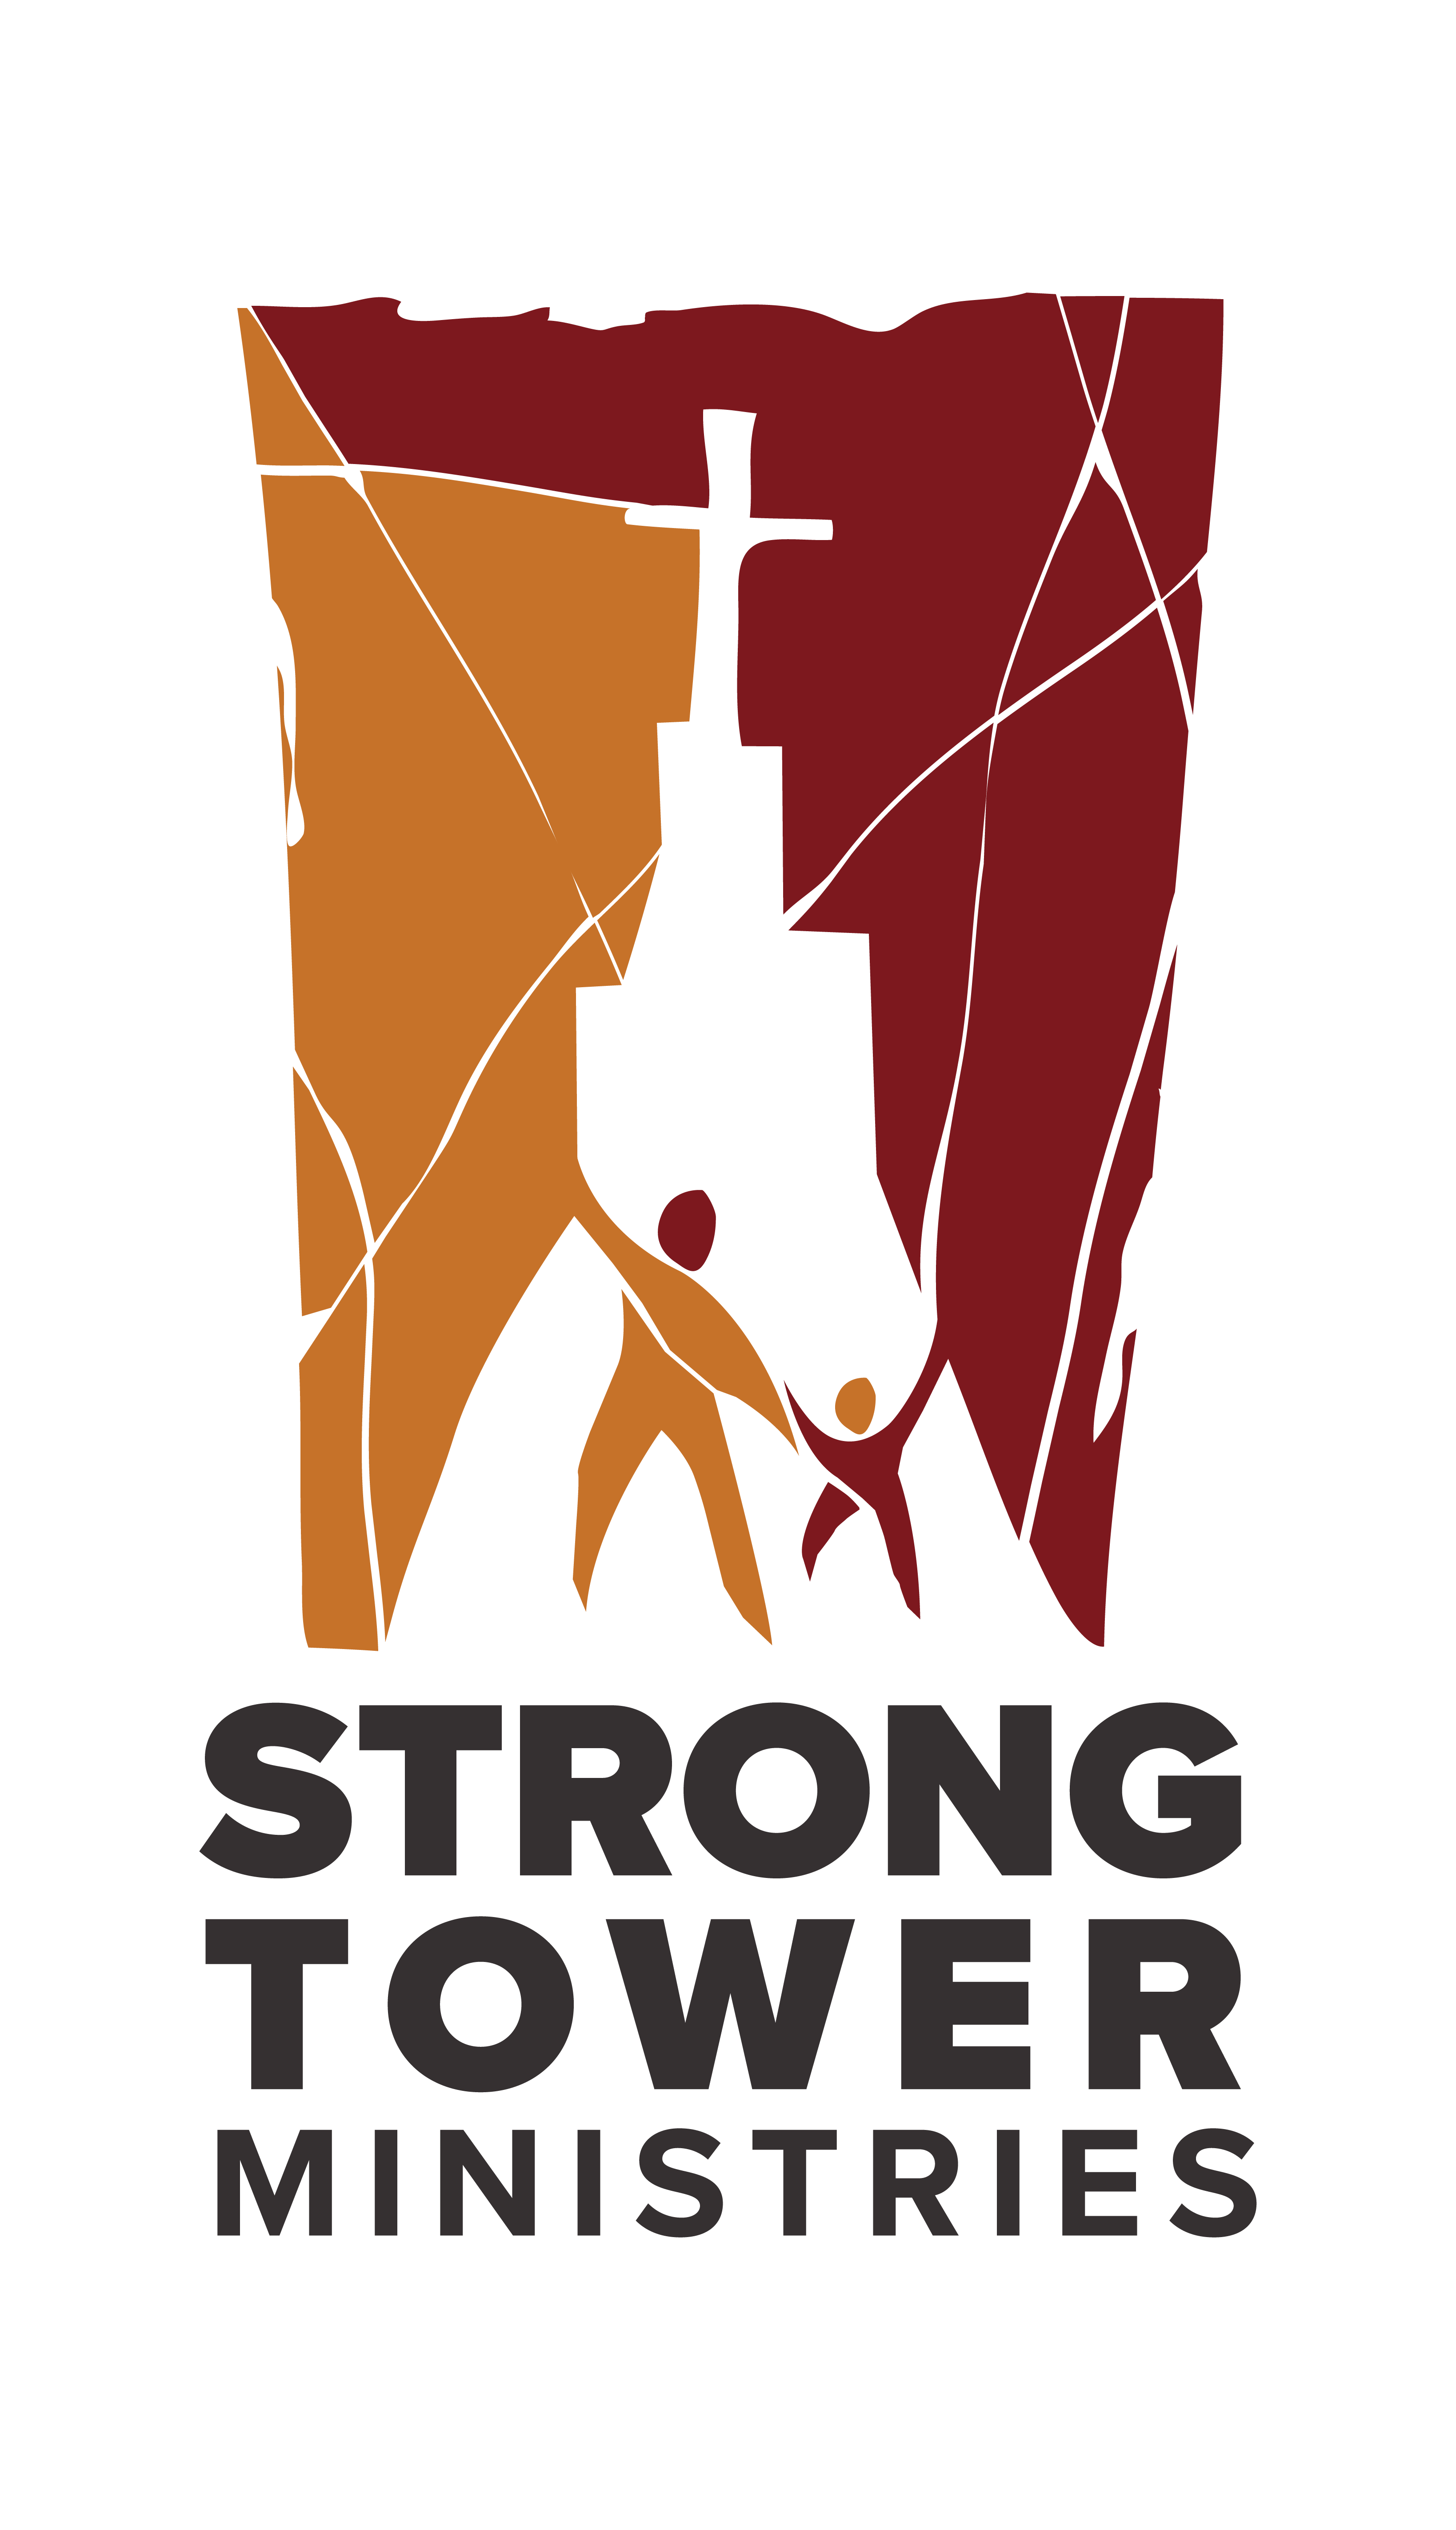 Strong Tower Ministries logo